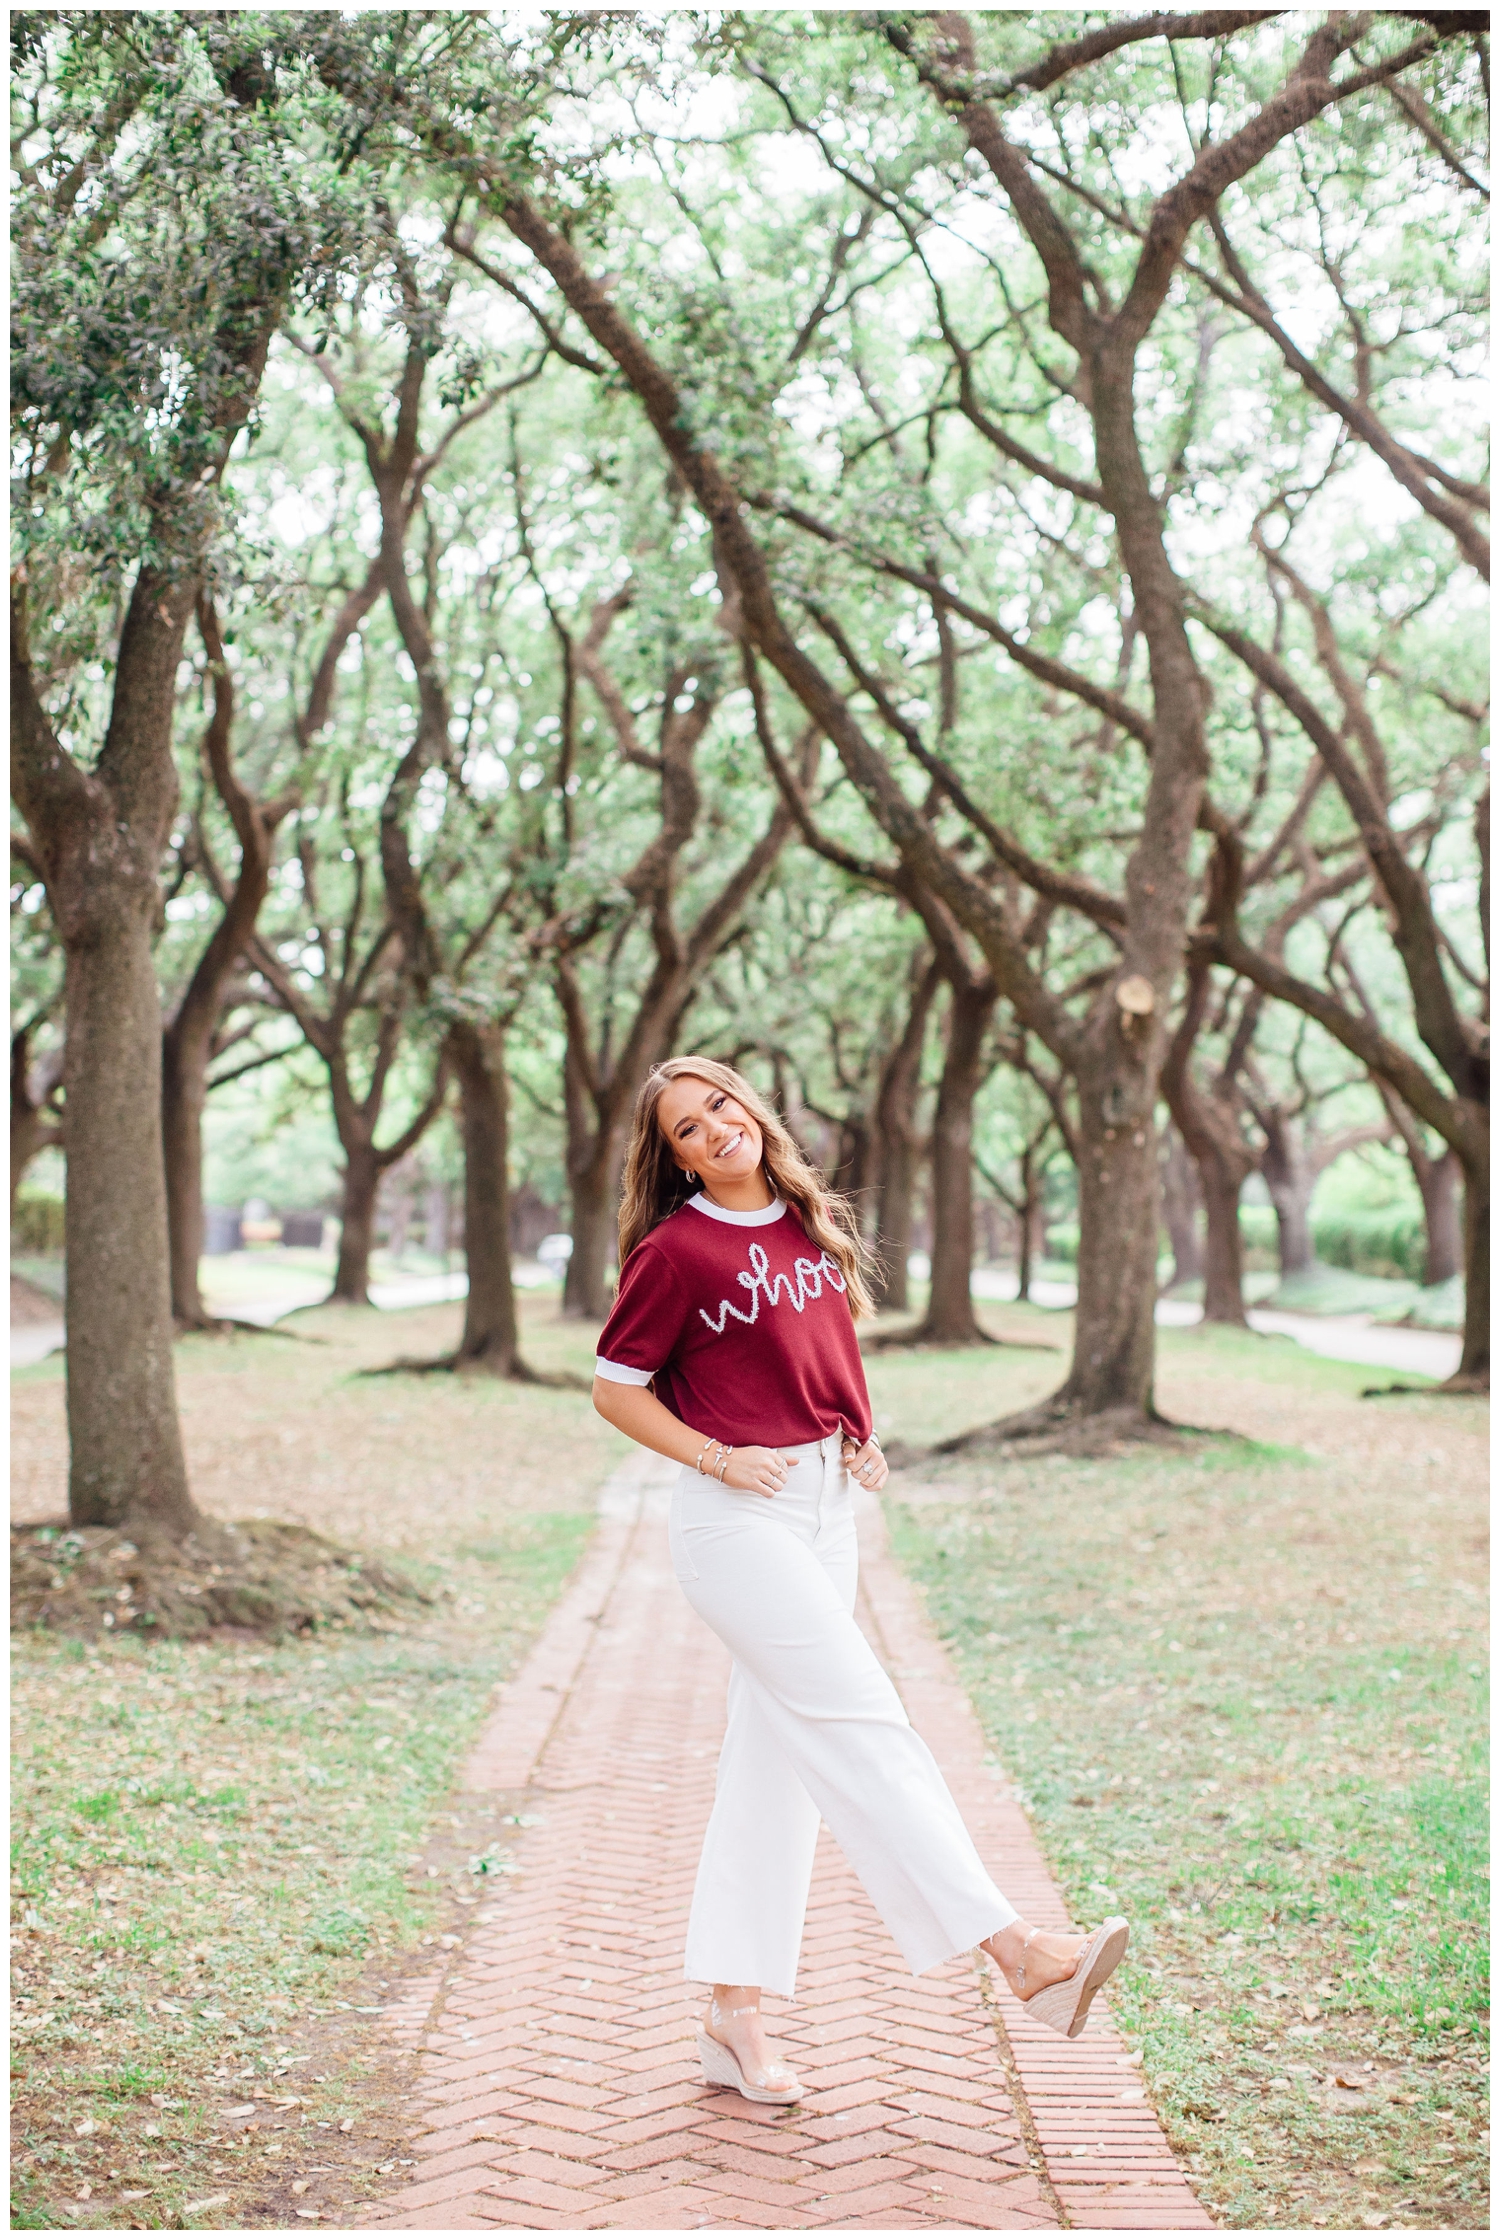 Vibrant senior pictures in Houston of girl in white shirt and maroon shirt standing in tree line